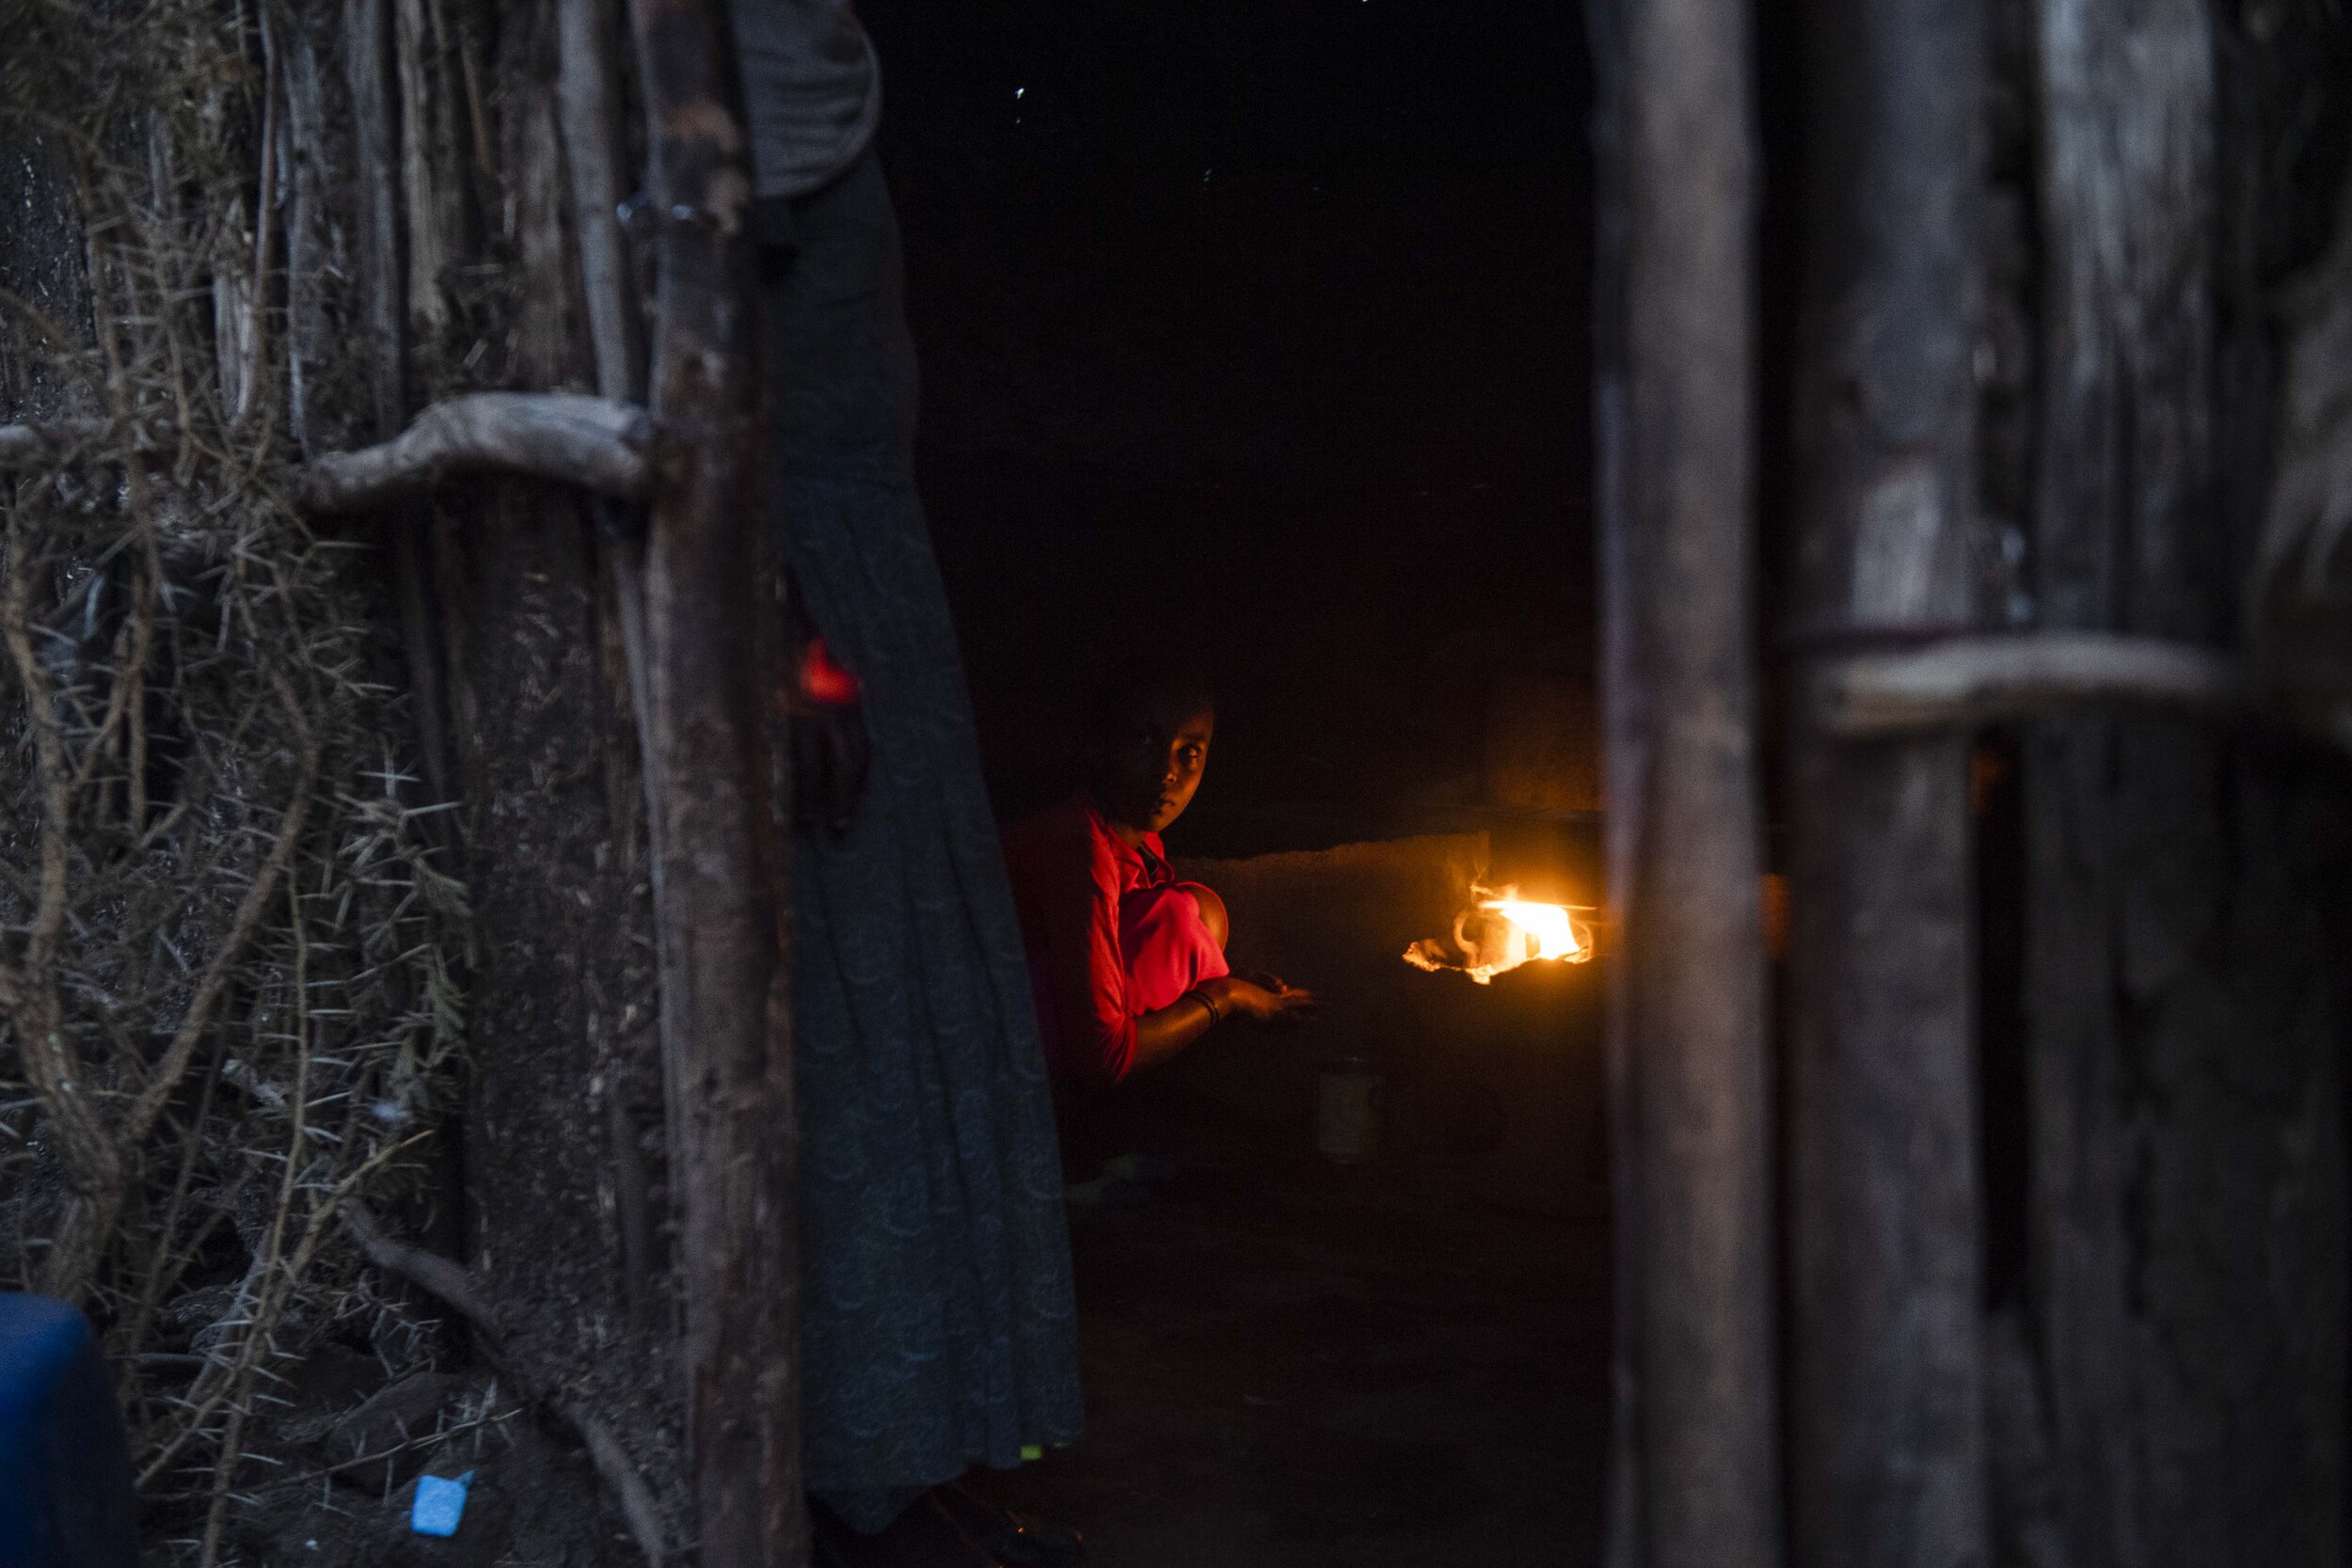  Asnaku Tufa, a resident of the Dire Korchachie Community in Shoki Kebele, Ethiopia, began feeling pain in her eyes two years ago. She could not afford to have her eyes checked and was fearful she was suffering from the same condition as her mother, 